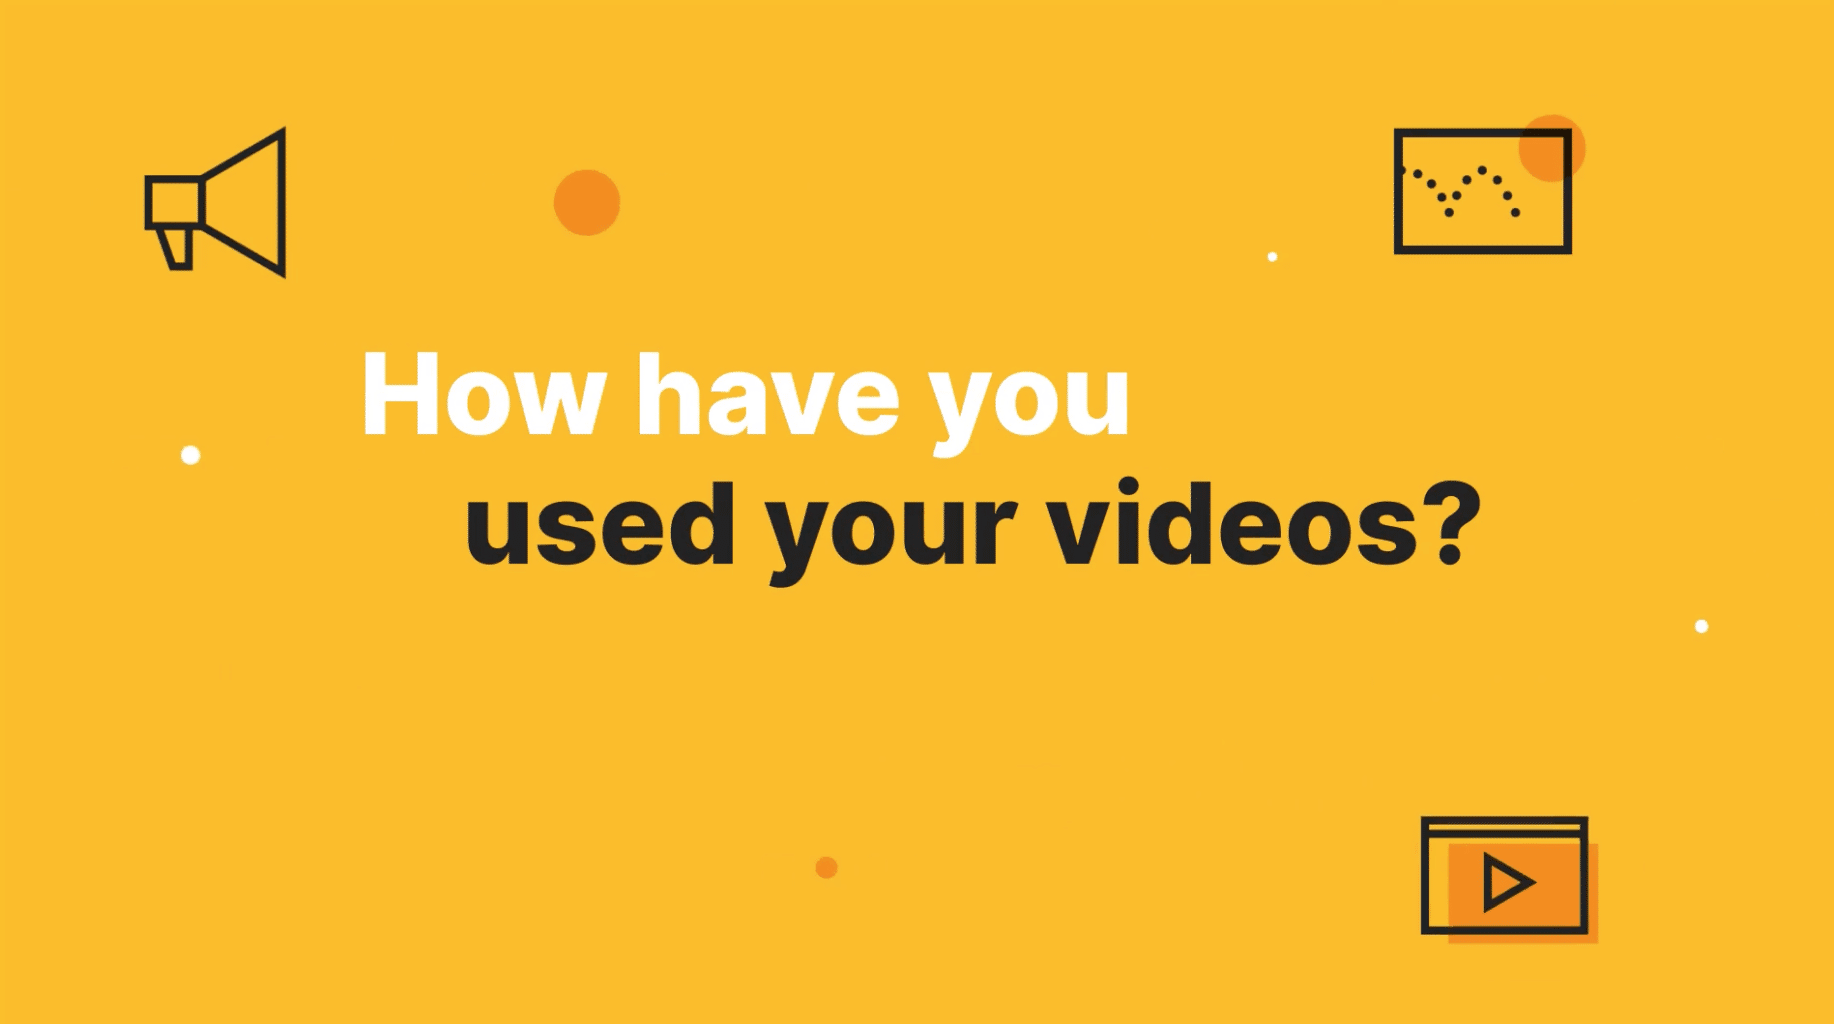 How have you used your videos?